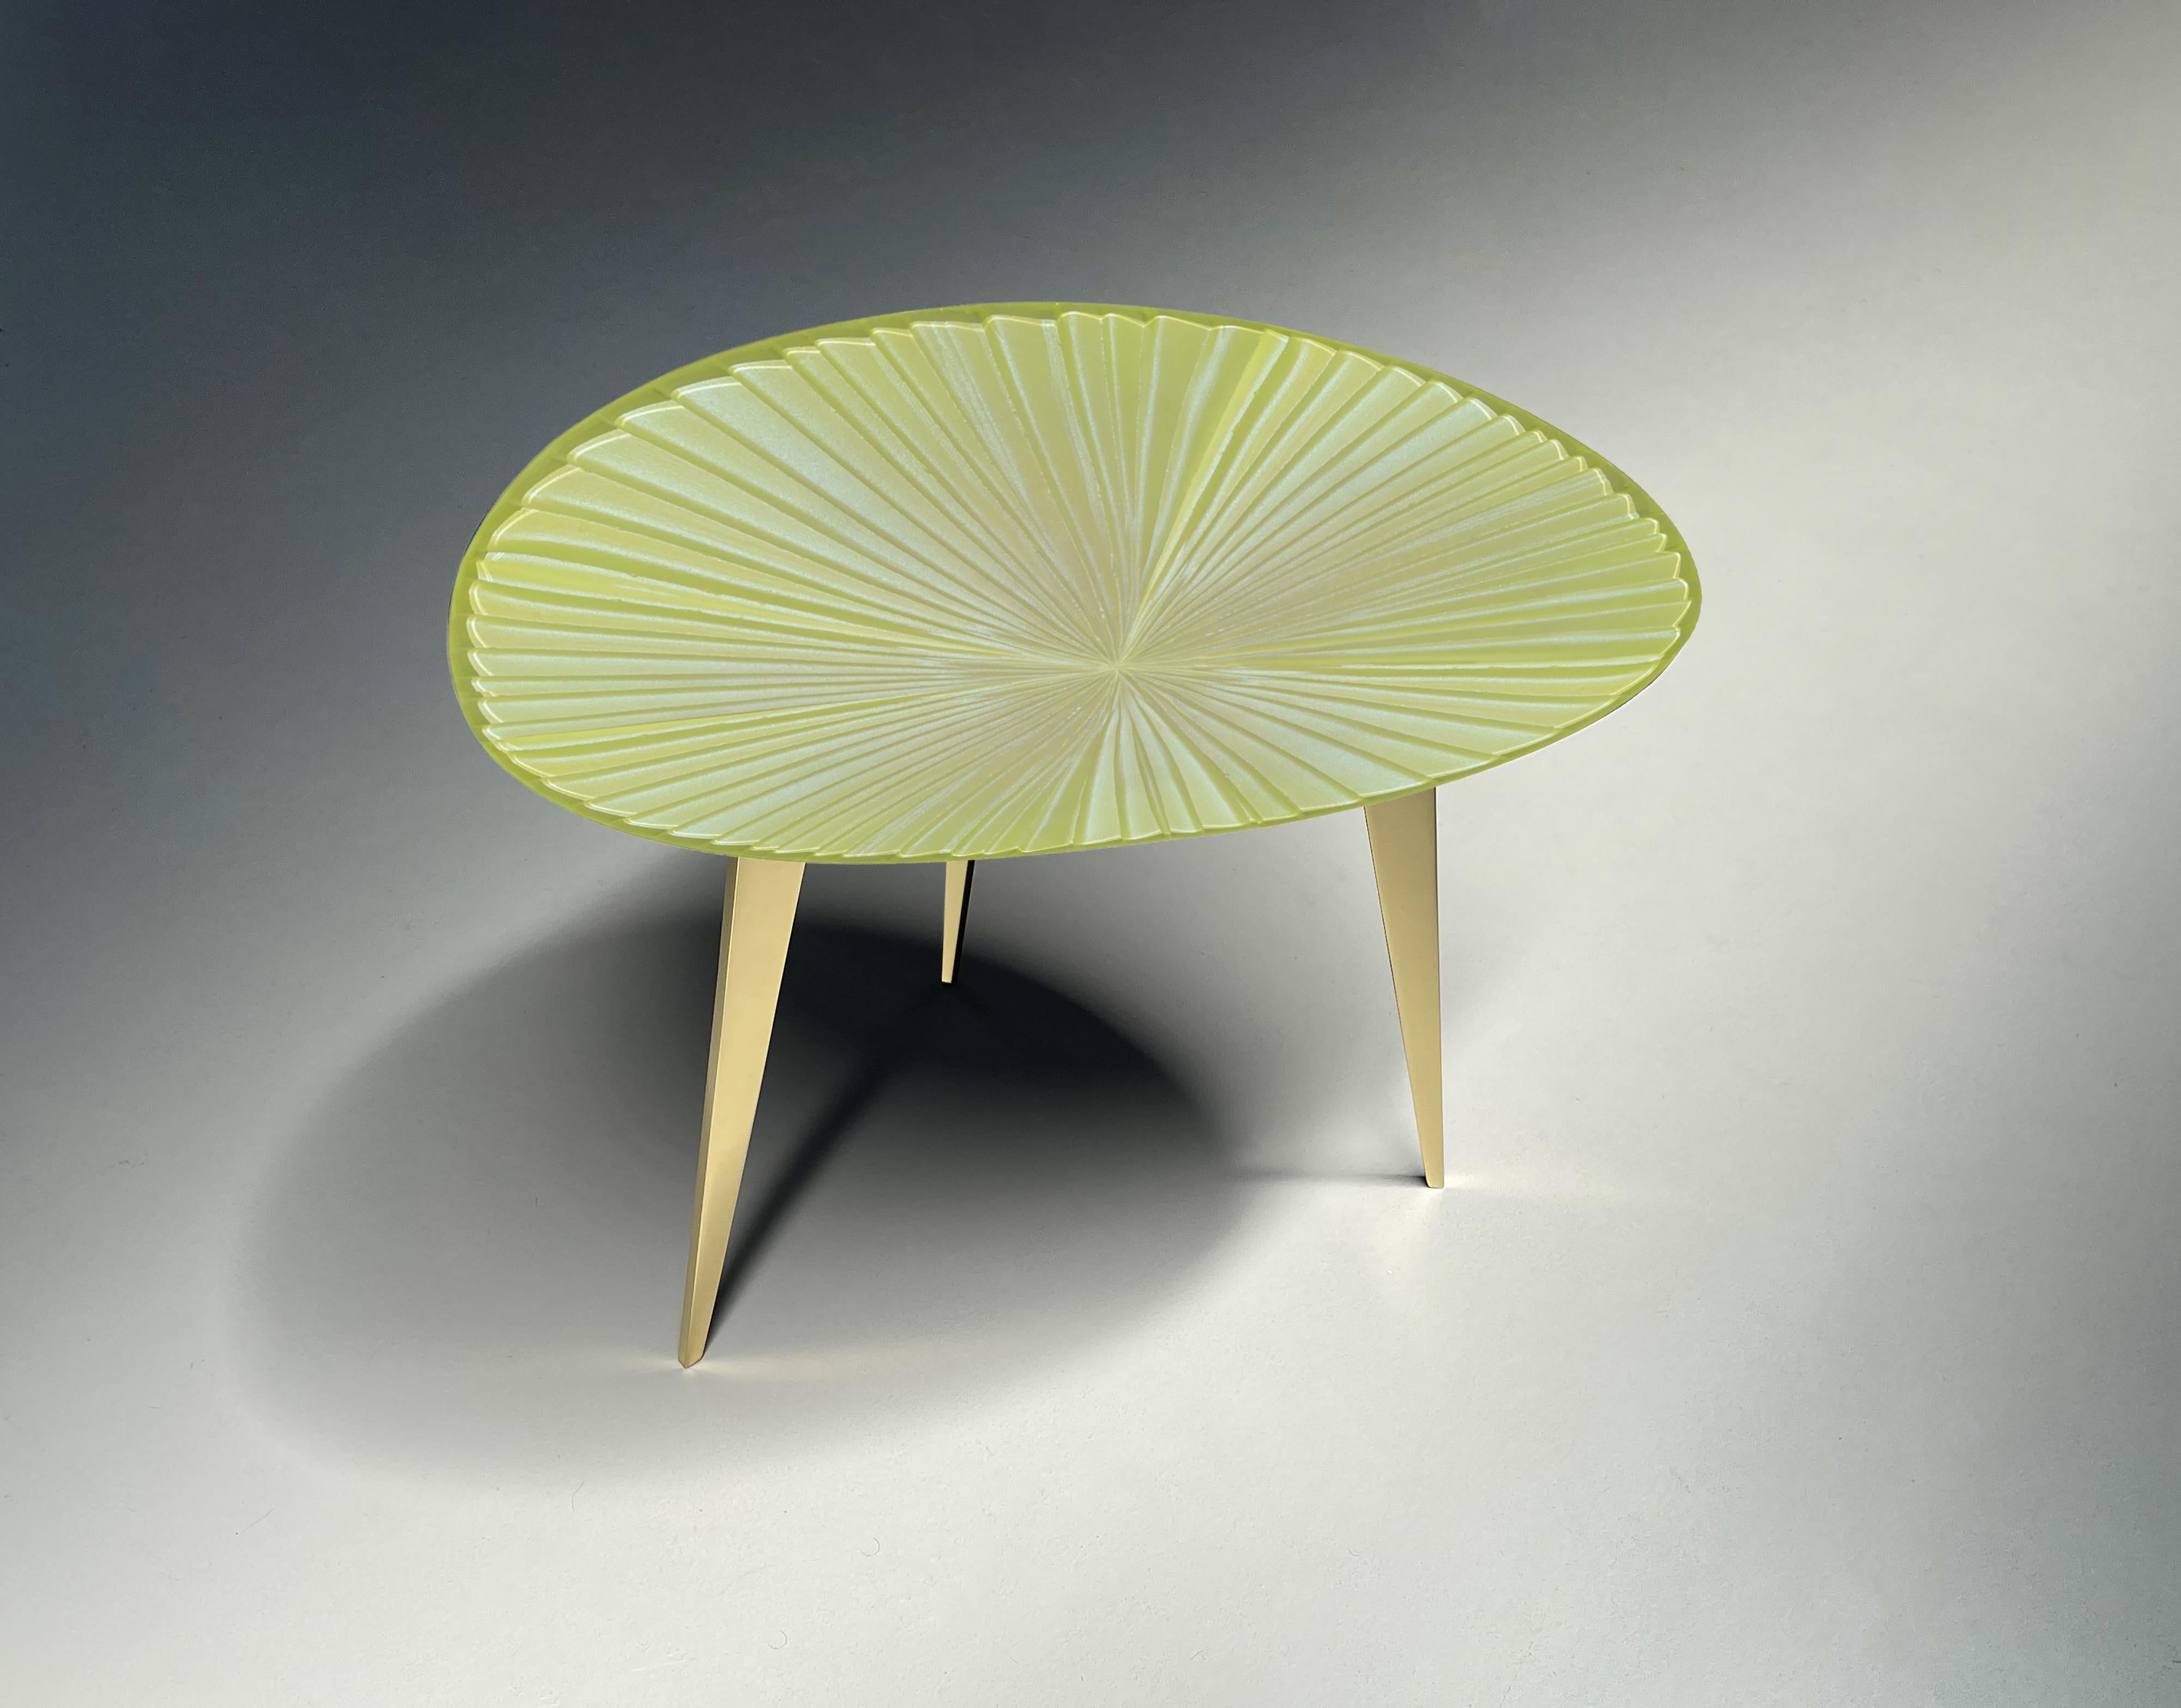 
'Fluo' is a original coffee table designed to enrich a living room with style, uniqueness and color.
The entire support structure is made with brass. The legs have a polished brass finish while the underplate is matt black.
The crystal top in the